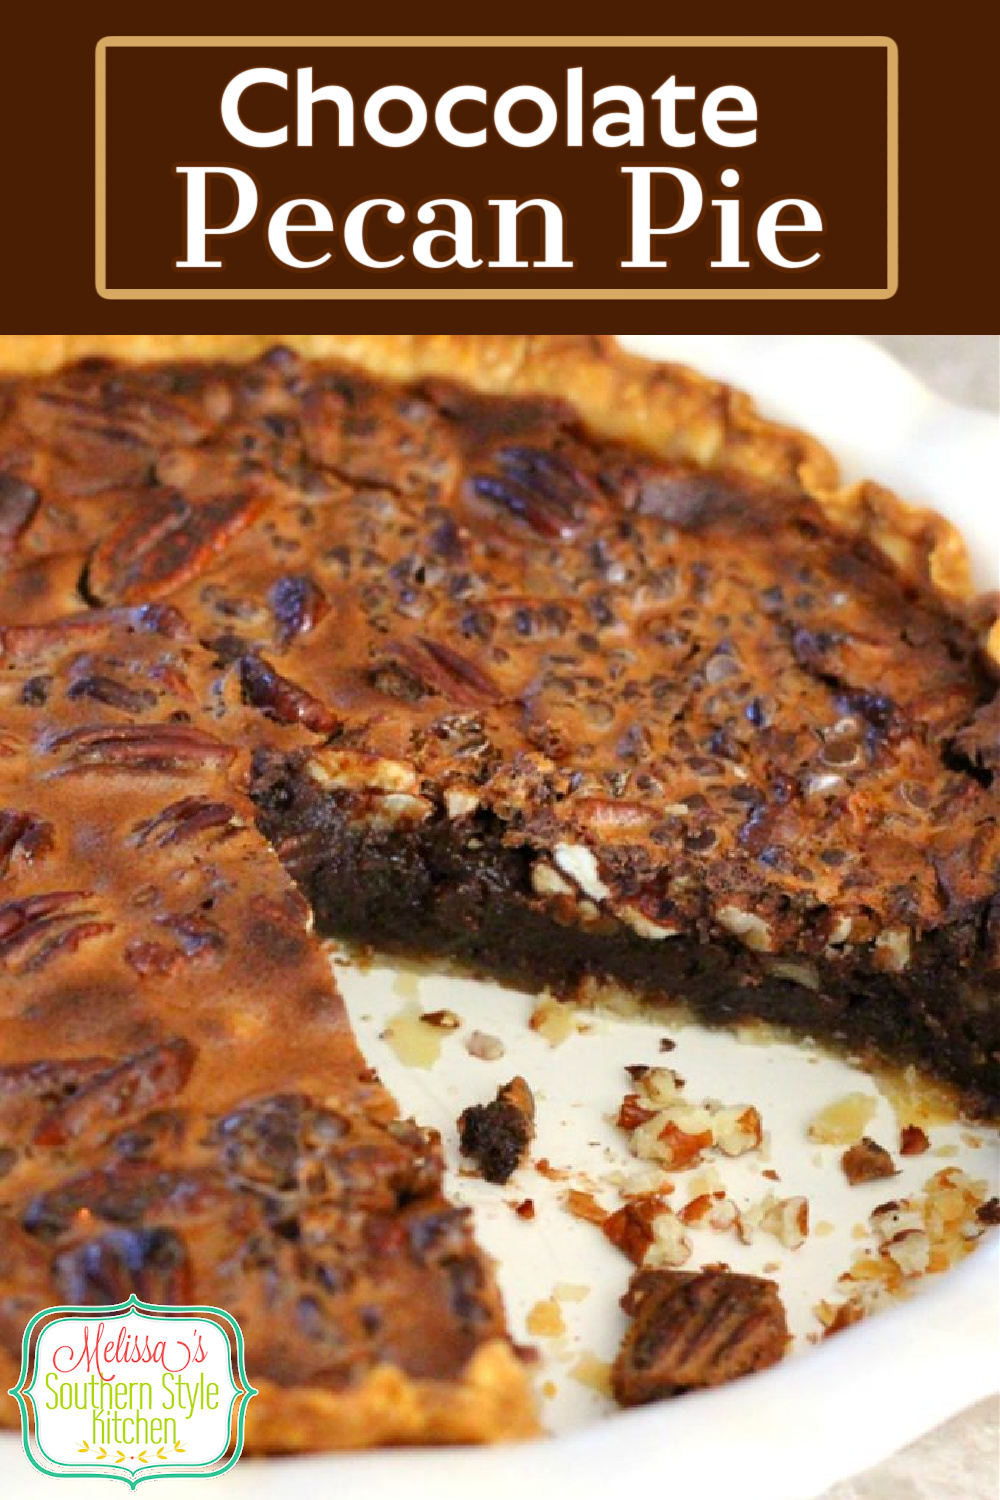 Serve this rich and fudgy Chocolate Pecan Pie for dessert #chocolate #chocolatepecanpie #pecanpie #chocolatedesserts #dessertfoodrecip#southerndesserts #southernfood #pie #pierecipes #easter #thanksgiving #christmas #newyears #holidayrecipes